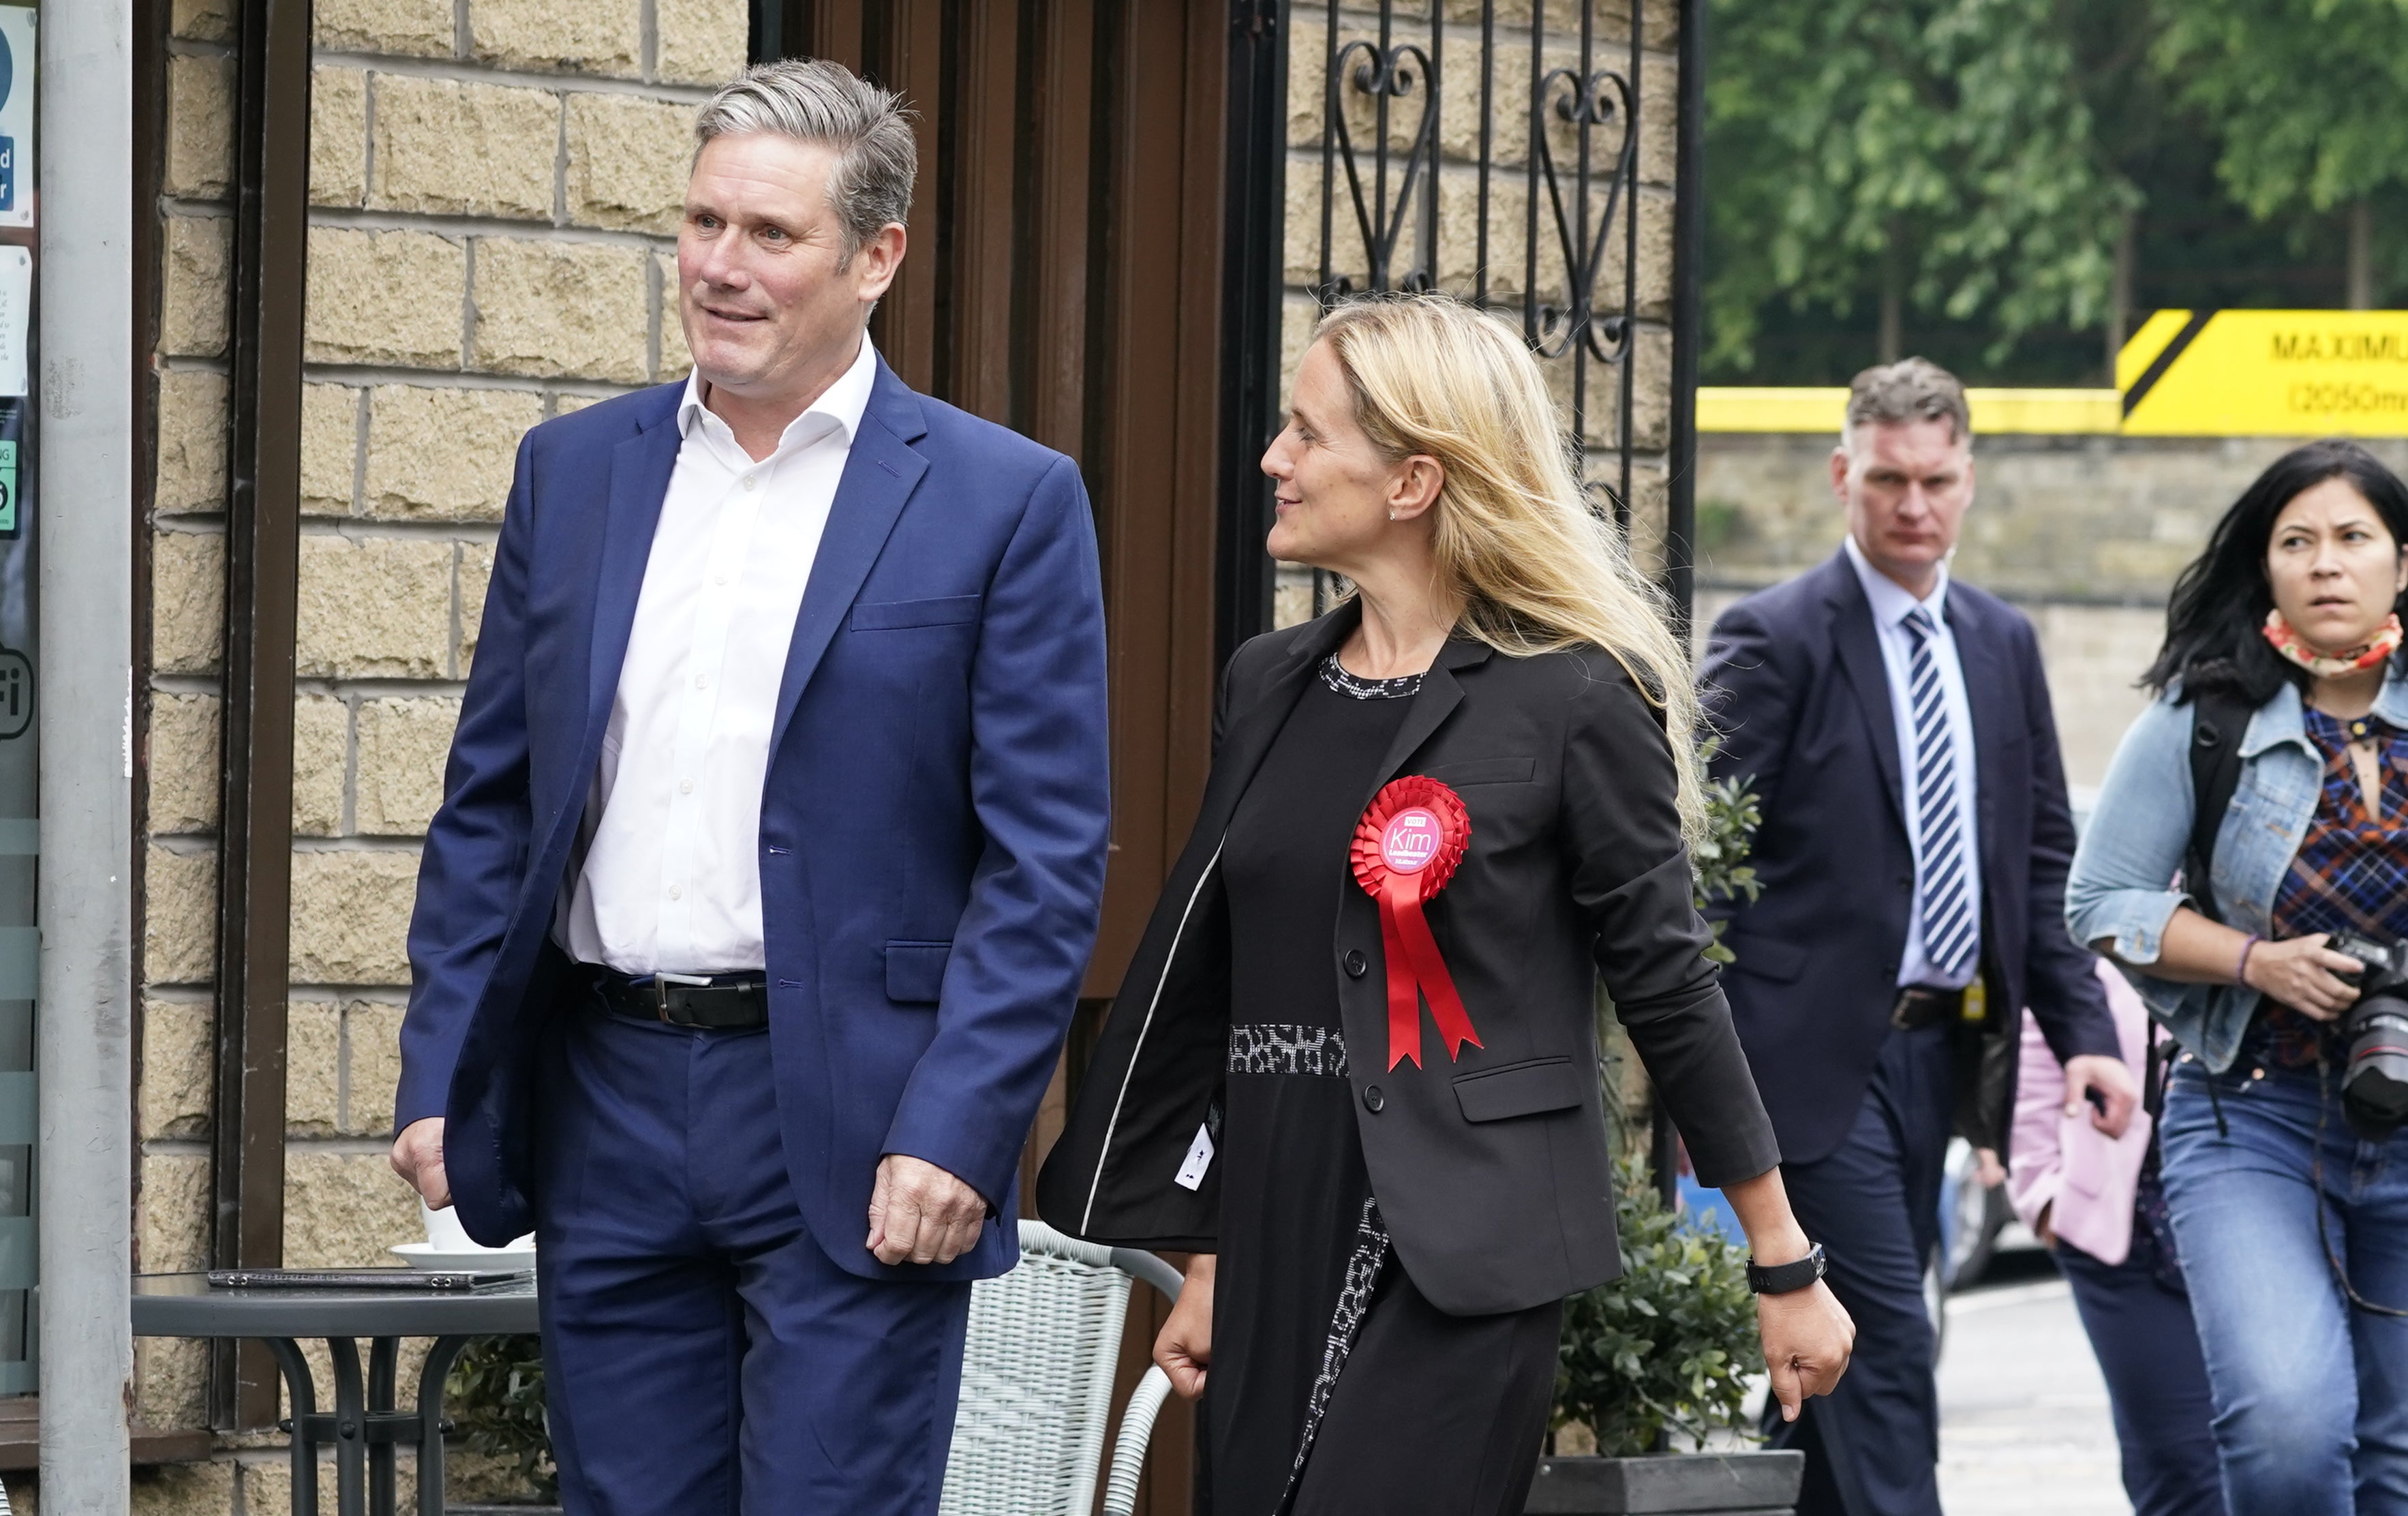 Sir Keir Starmer walks with Kim Leadbeater who won the Batley and Spen by-election (Peter Byrne/PA)